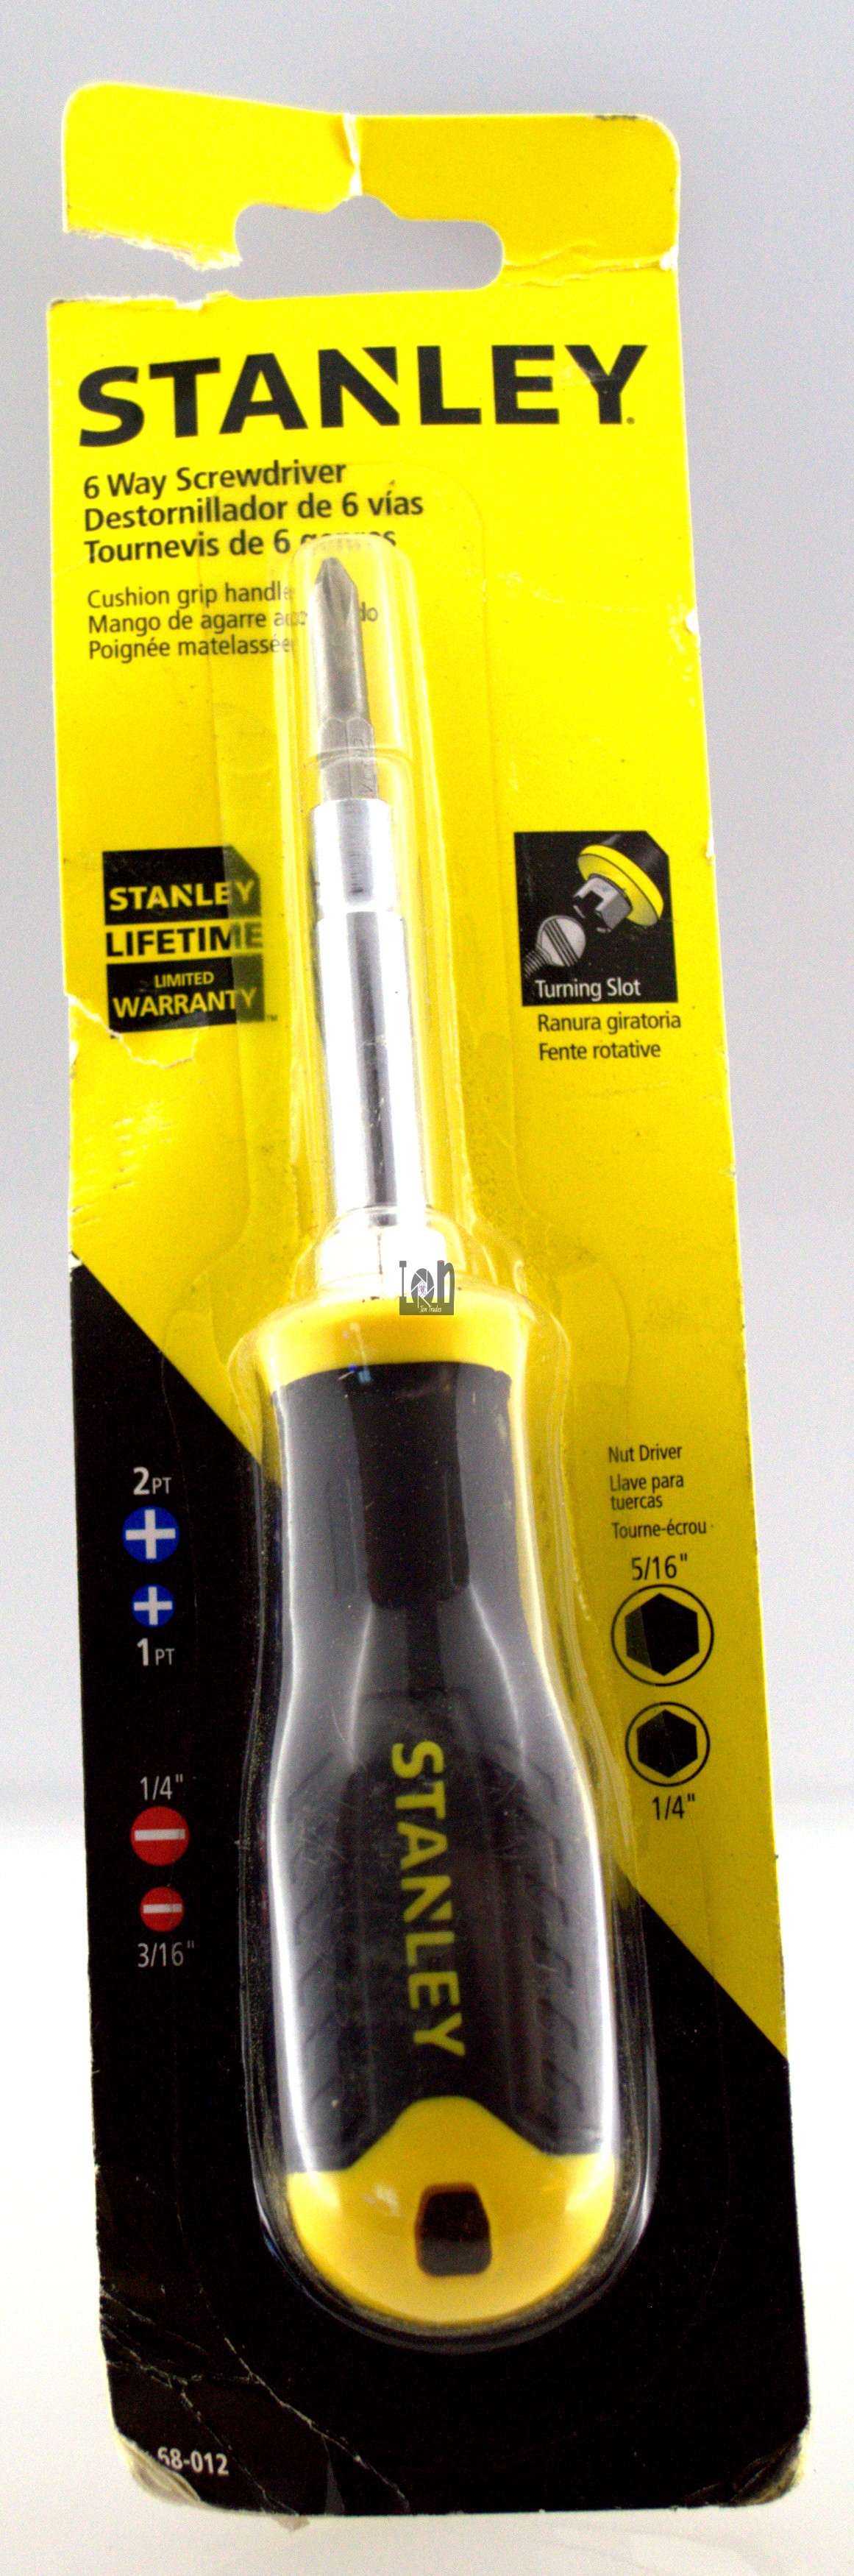 Stanley Tools 6 in 1 Screwdriver Nutdriver Electrician Tools 68-012